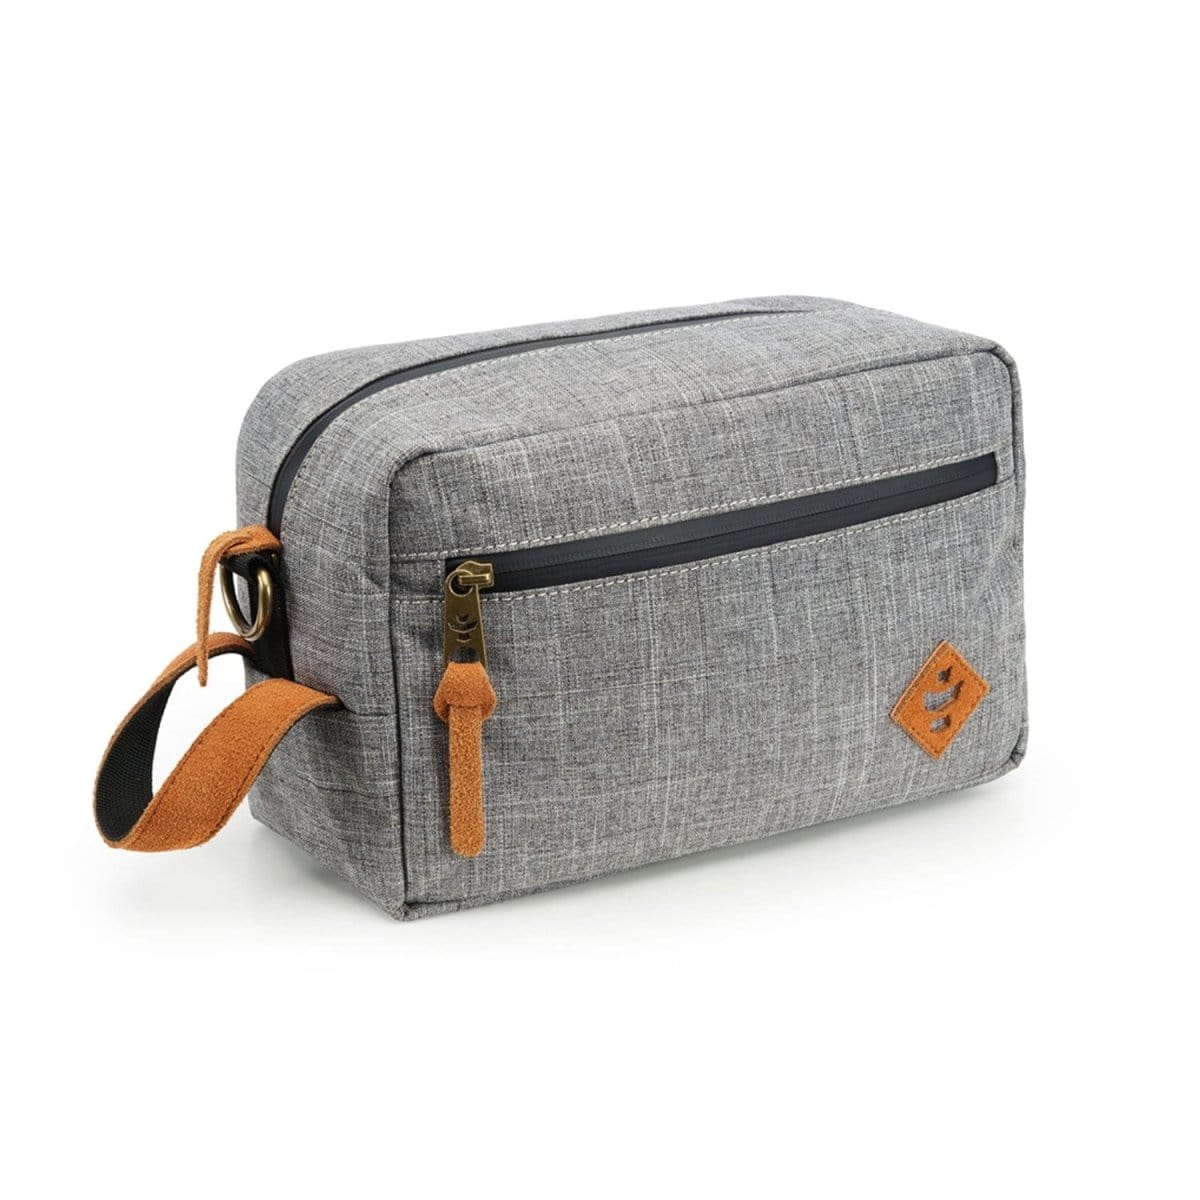 Revelry Supply Travel Bag Crosshatch Grey The Stowaway - Smell Proof Toiletry Kit